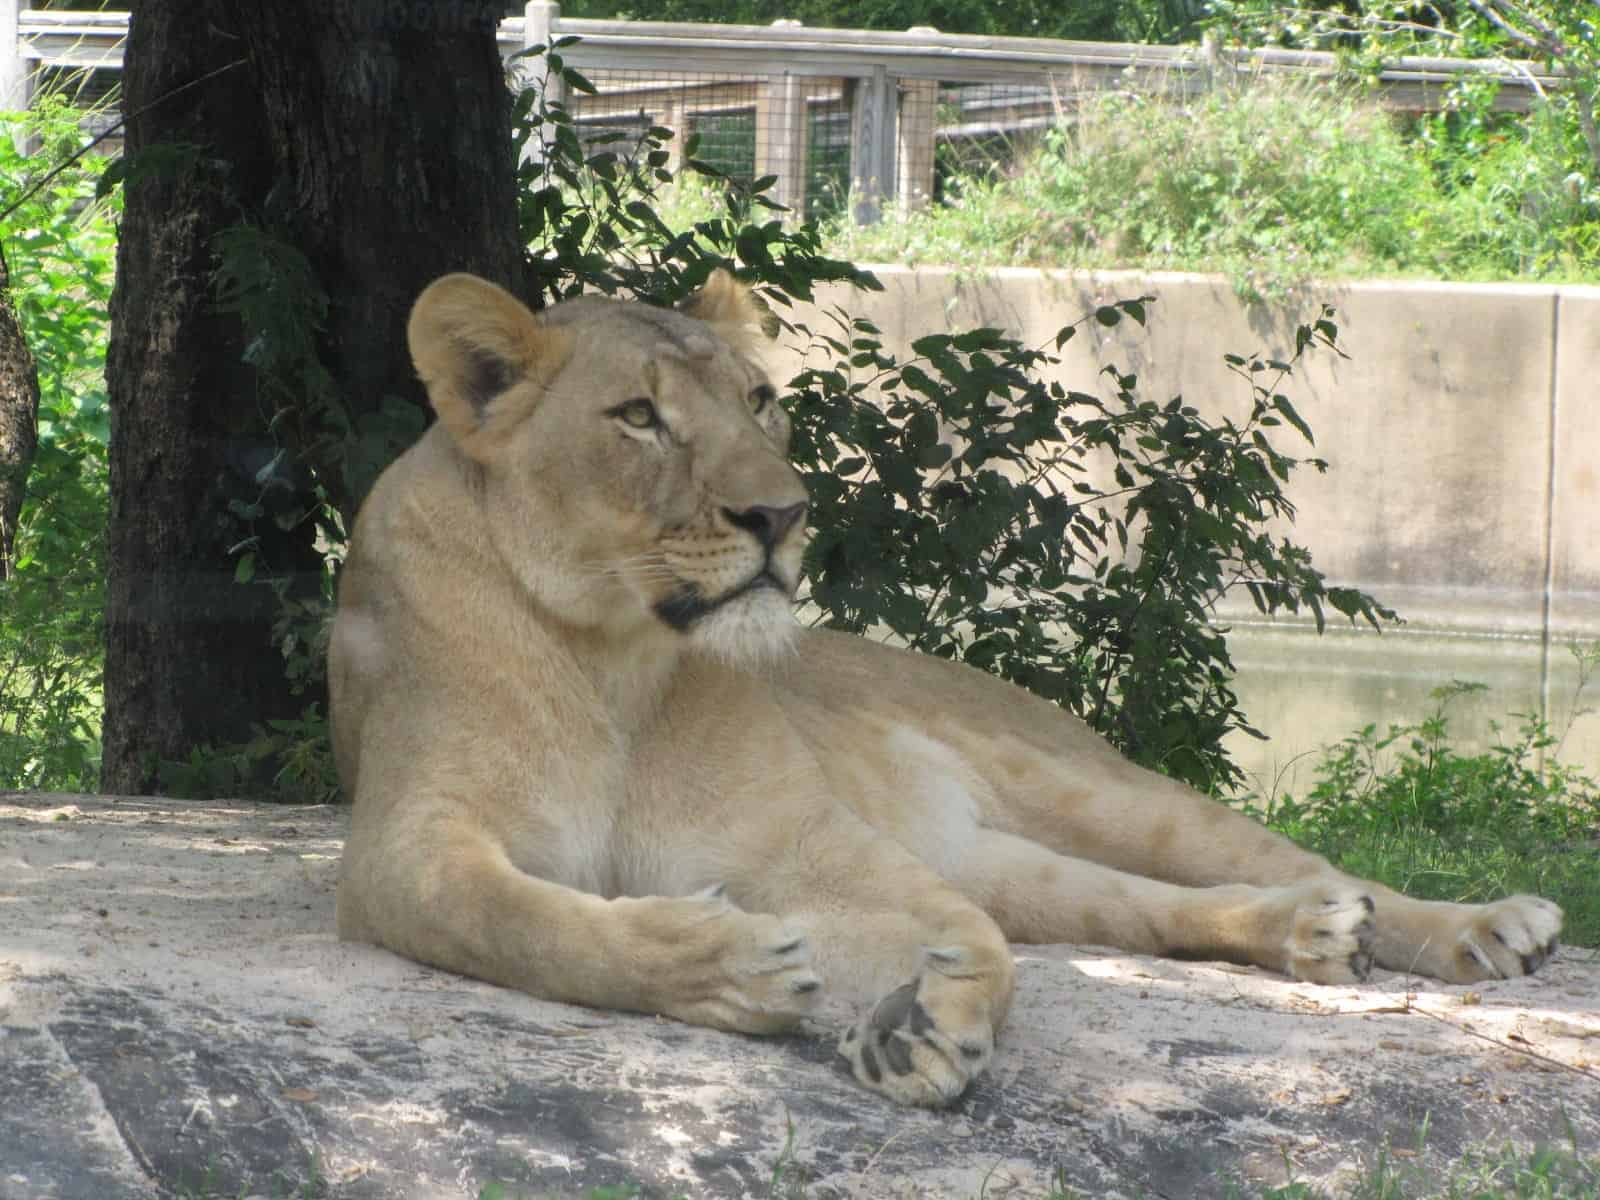 Lioness in the Houston Zoo in Houston TX